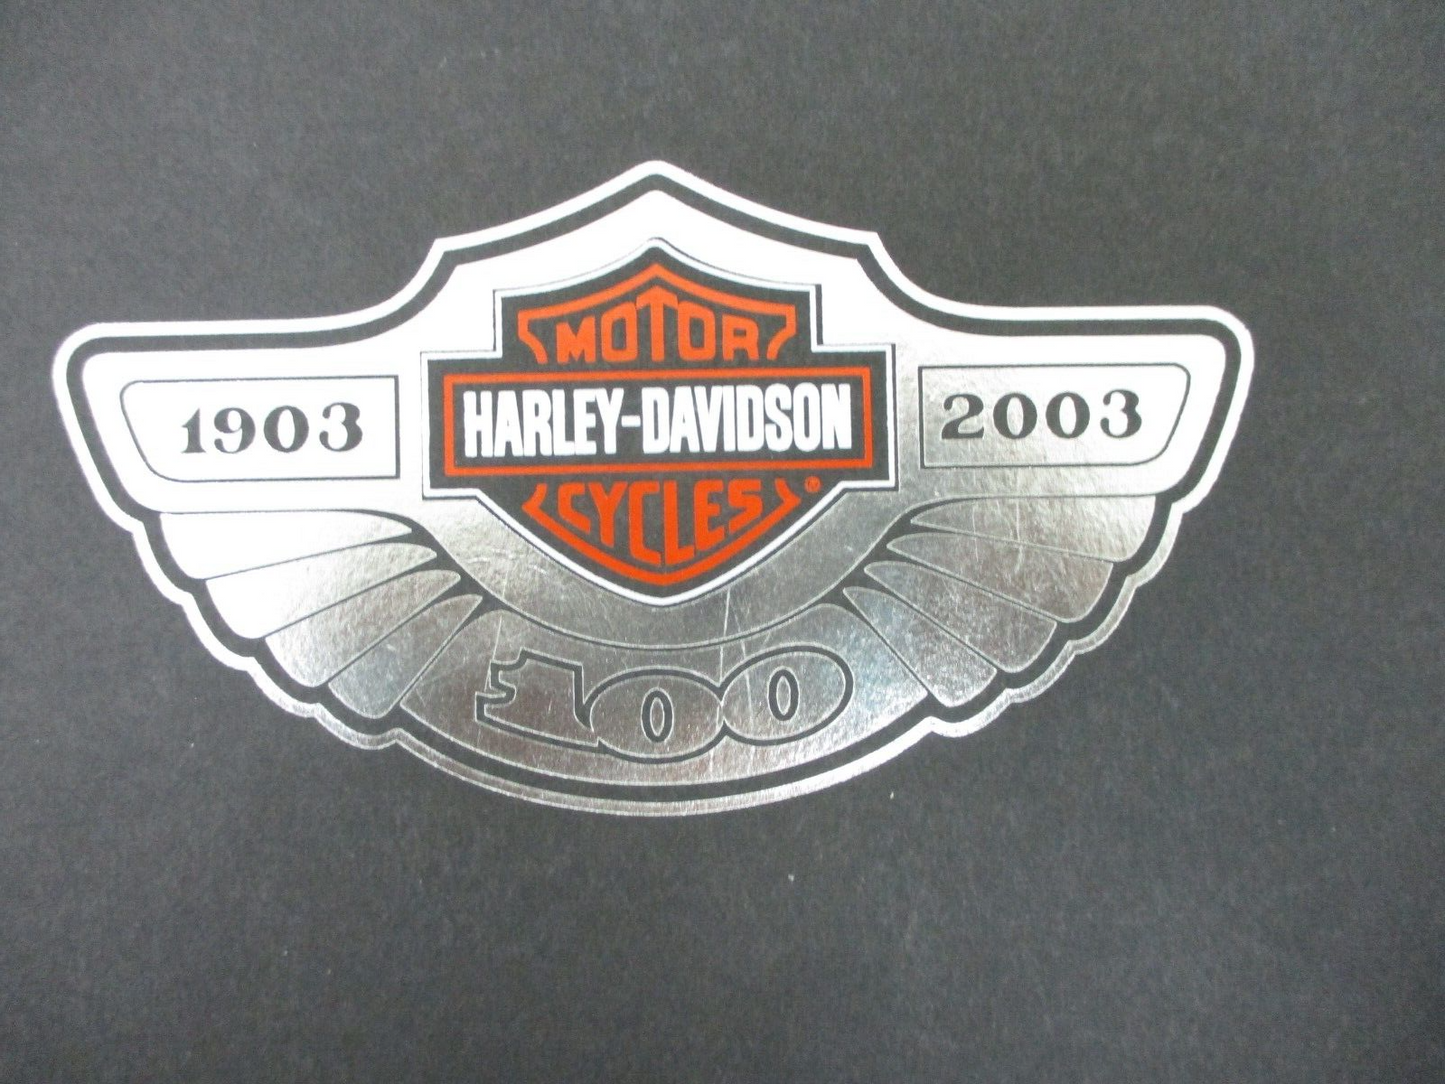 Harley-Davidson 1903-2003 100th Anniversary Accessory Packages